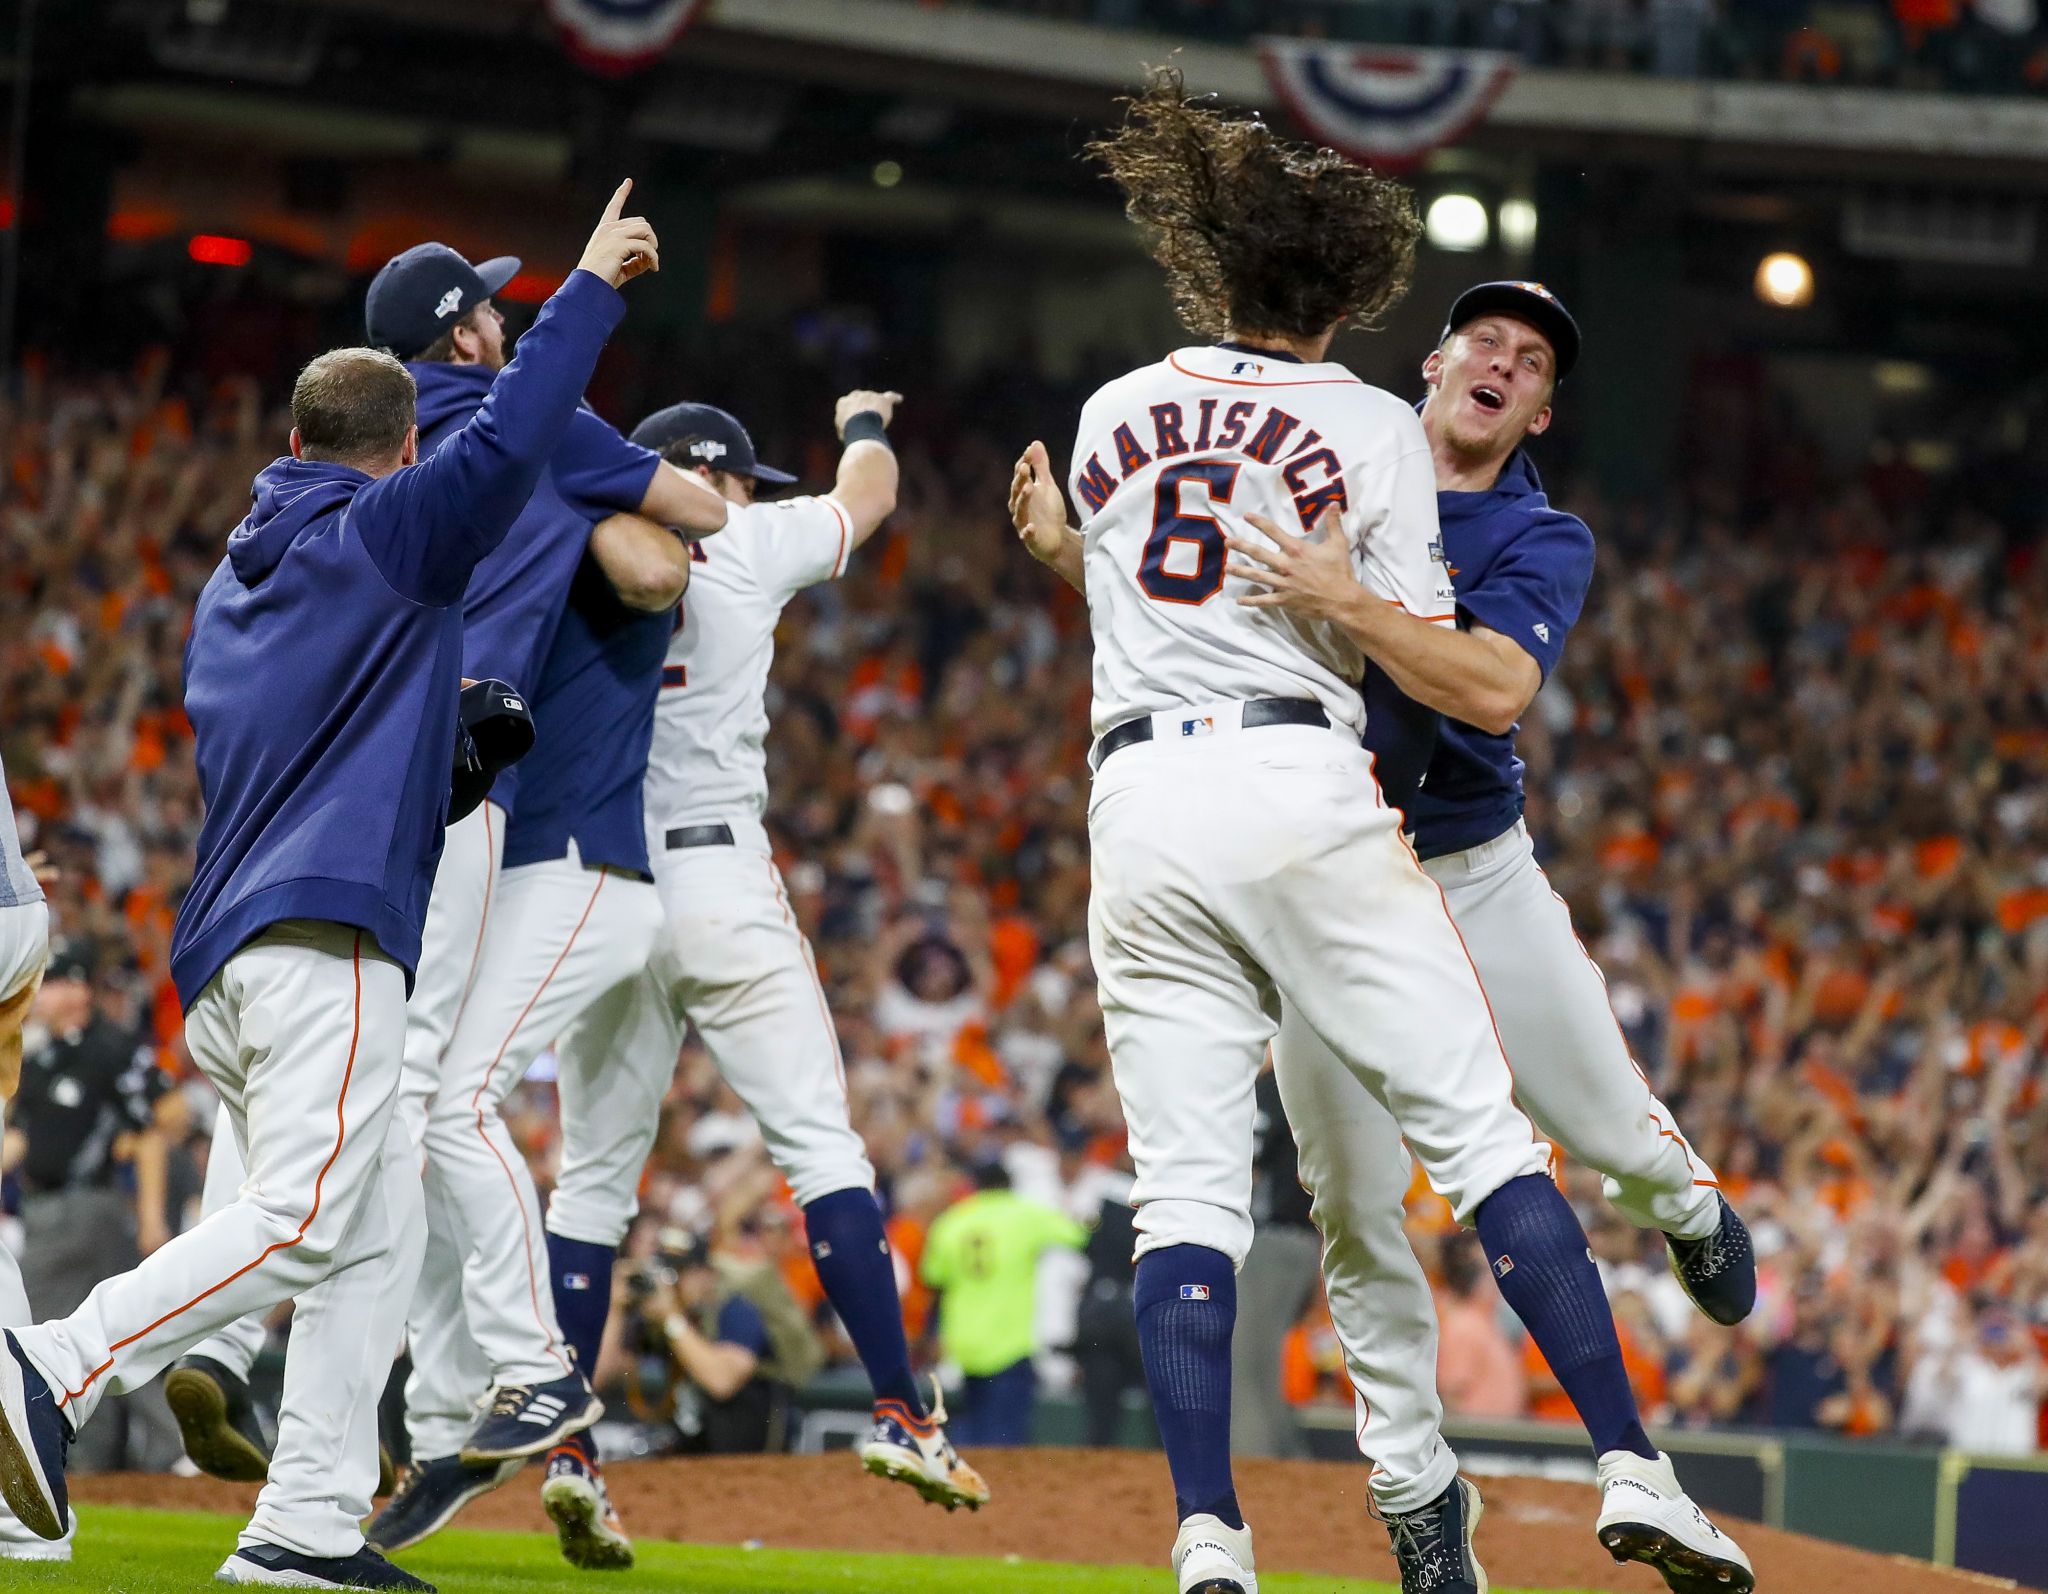 Academy reopens to sell Astros World Series shirt - Sharron Melton 